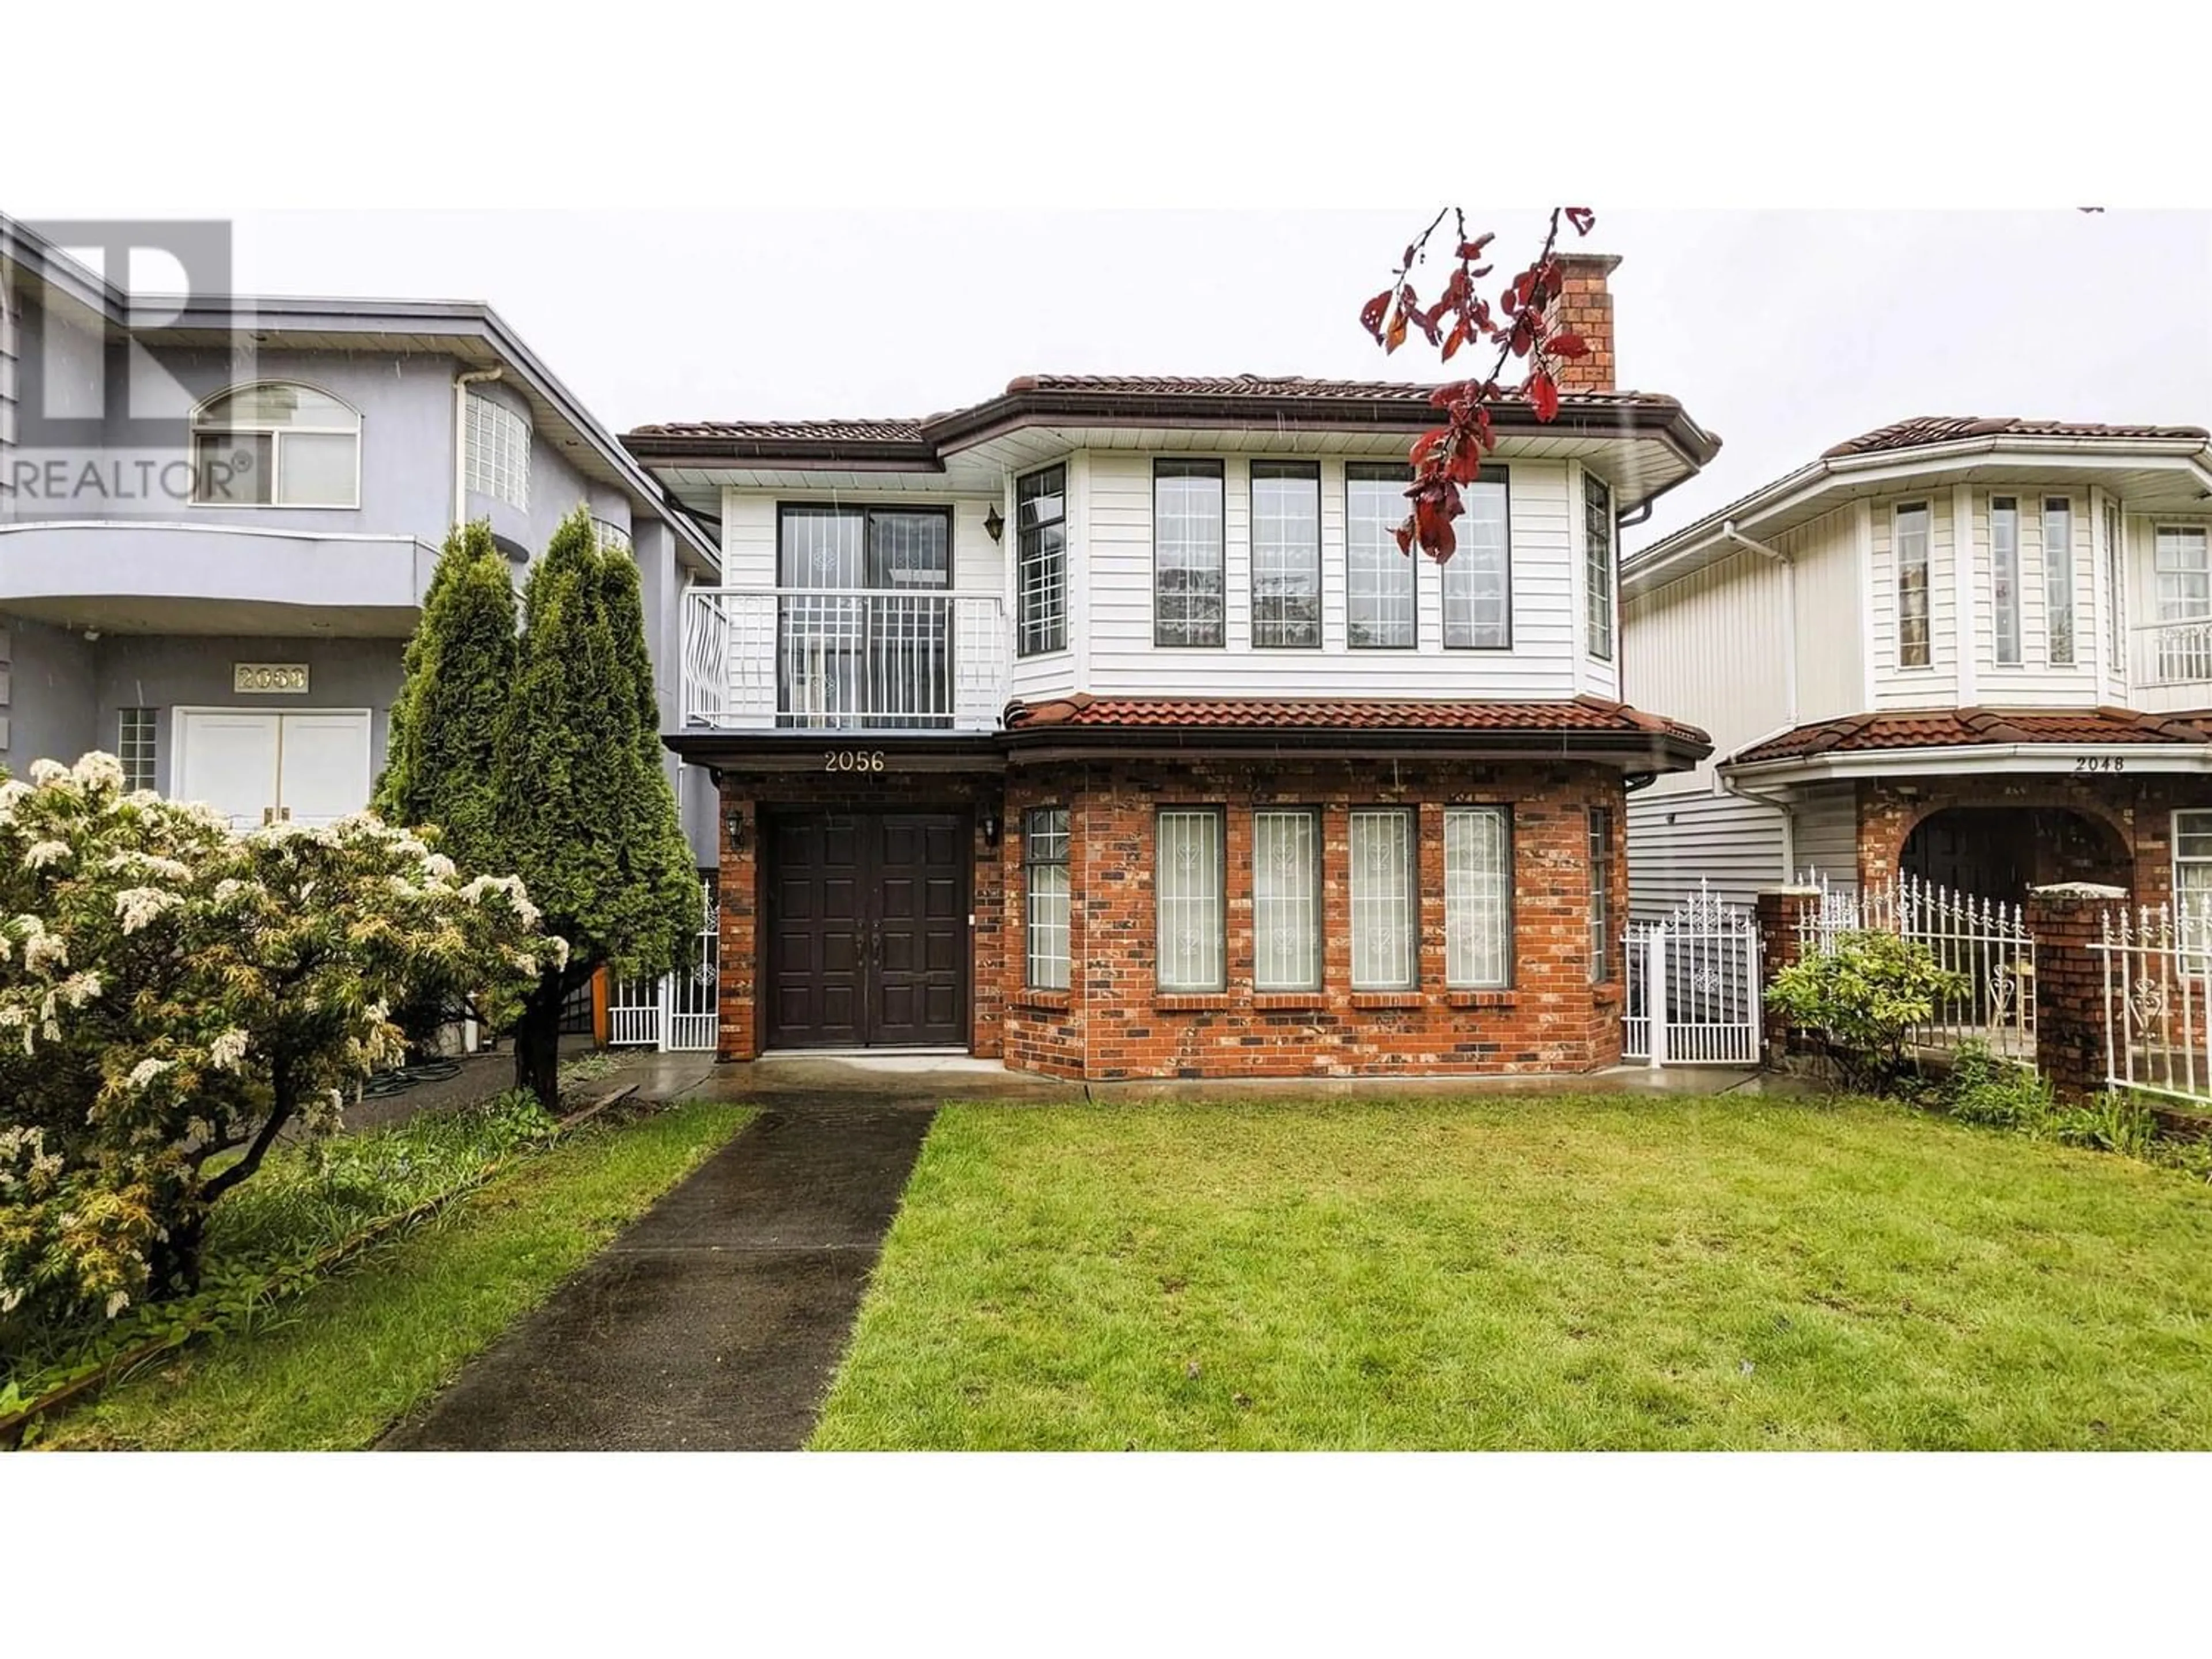 Frontside or backside of a home for 2056 E 52ND AVENUE, Vancouver British Columbia V5P1W9